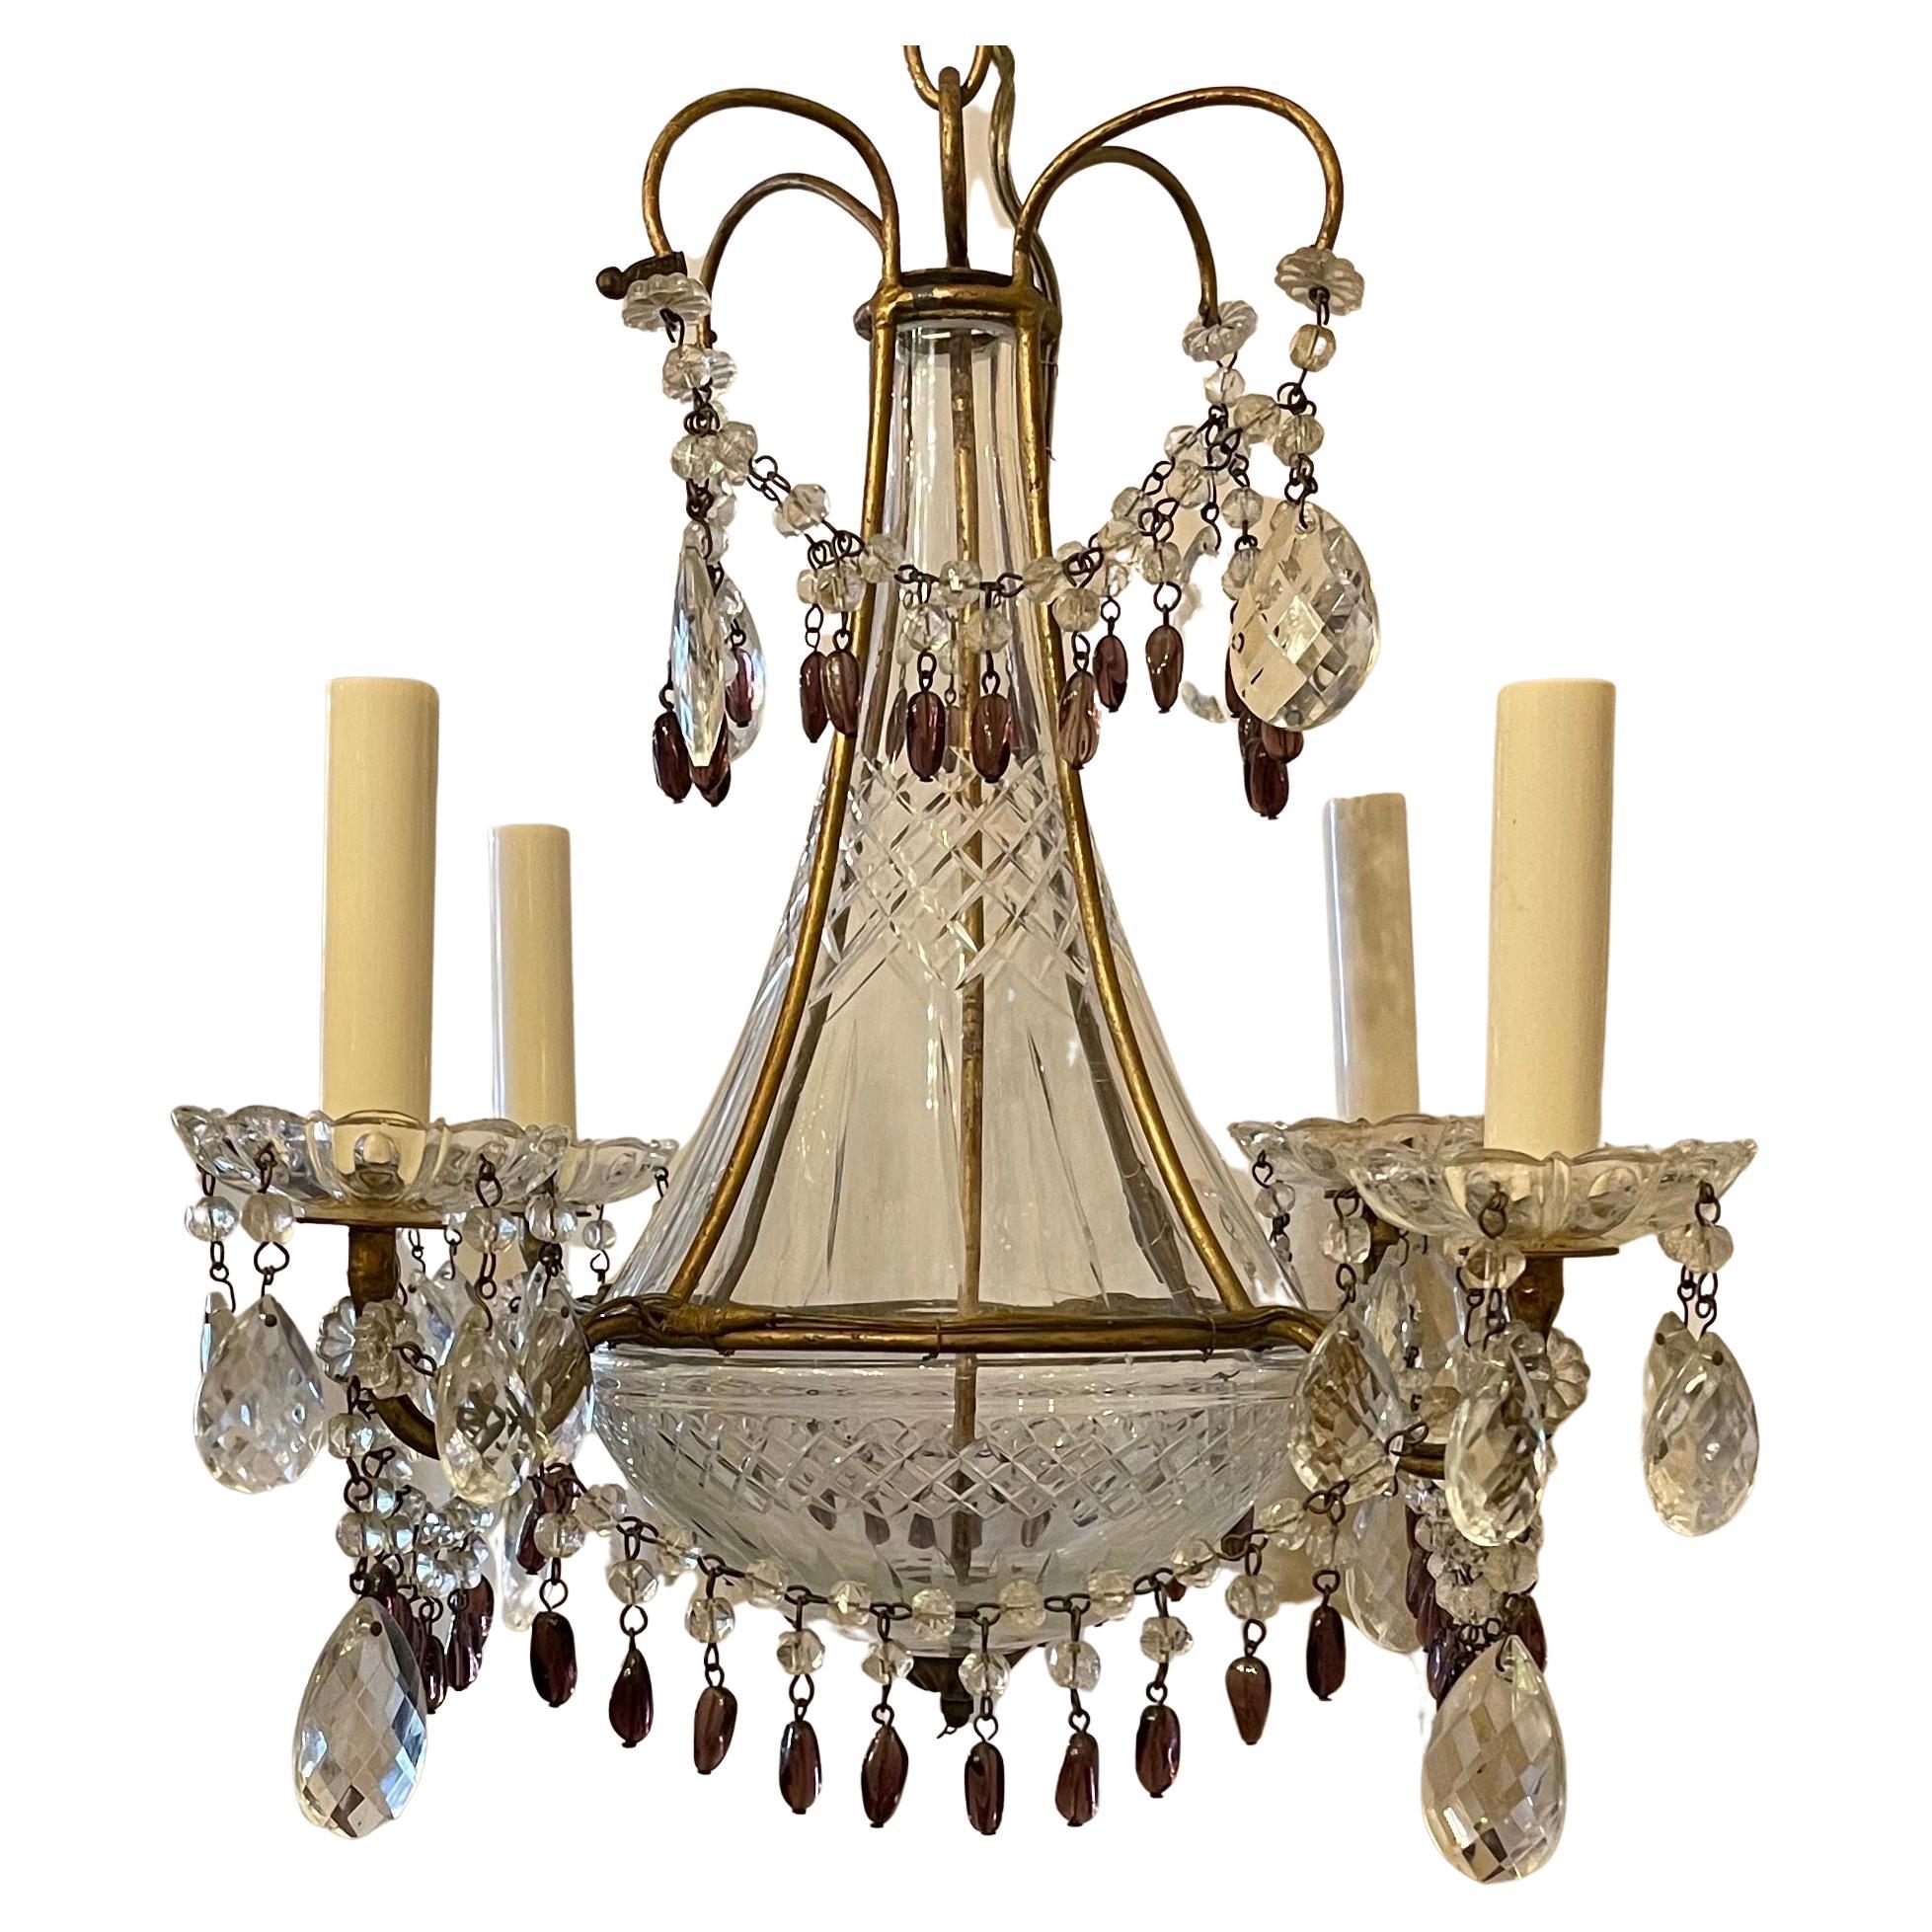 A Wonderful amethyst and clear faceted crystal drop fixture with a crystal center piece urn, this beautiful petite chandelier in a gold gilt frame has 4 candelabra lights and comes with chain canopy and mounting hardware for installation.